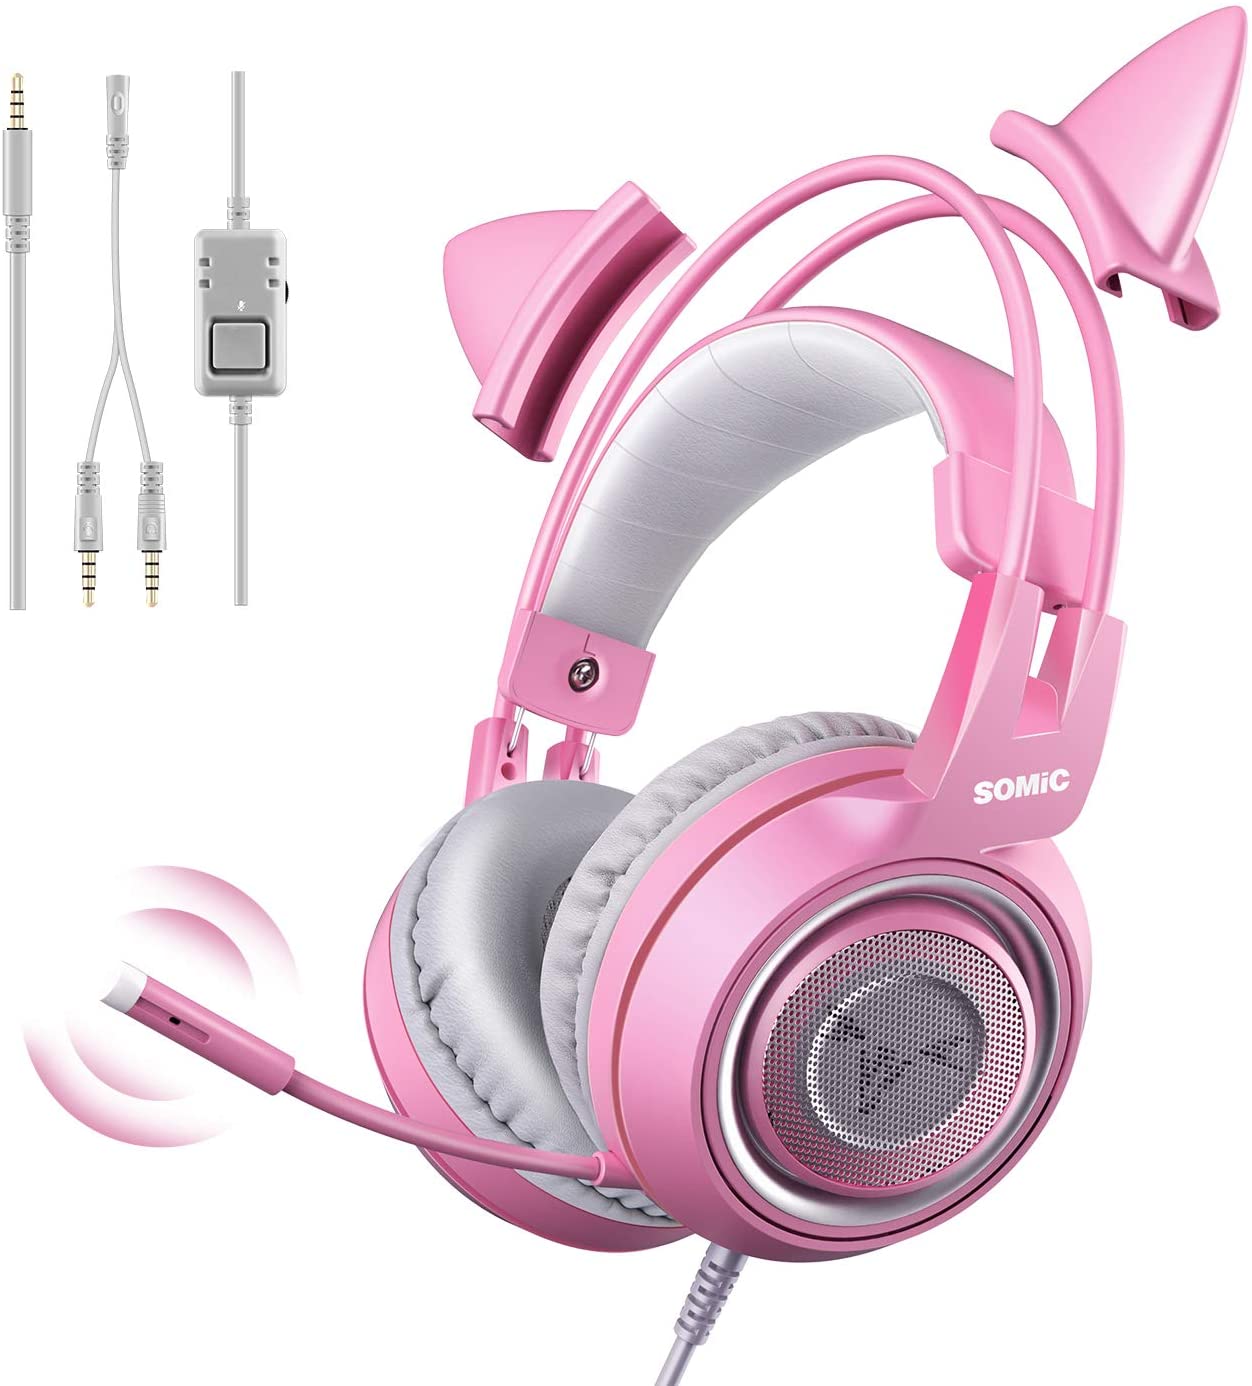 The 7 best pink gaming headsets in 2020 | Dot Esports